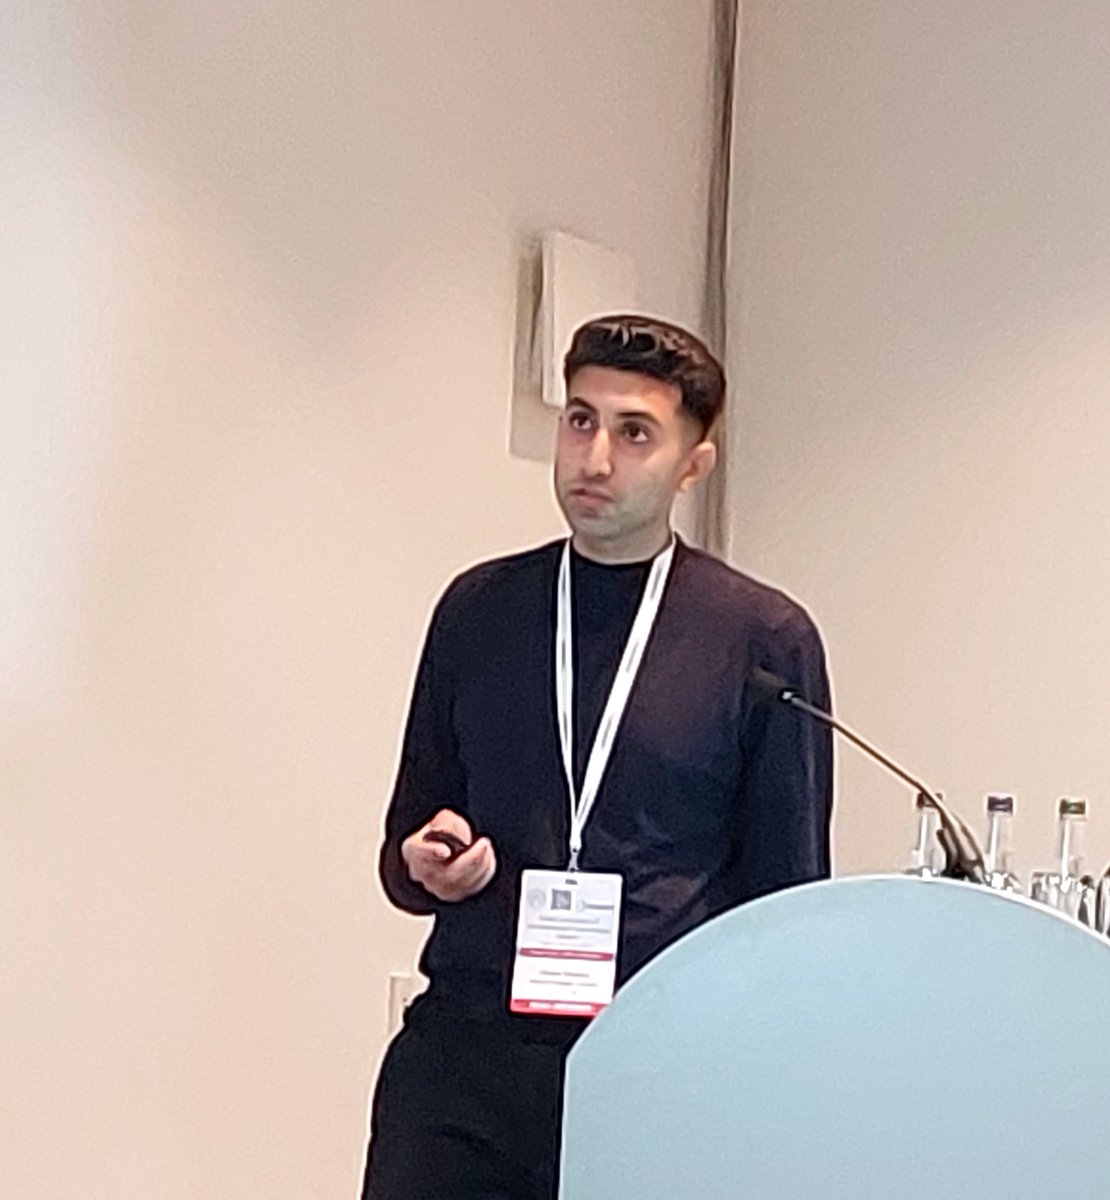 Prize winner at the BSID2022 Shane Solanky presenting data from the @DiMeglioLab on a candidate biomarker of response for biologics targeting the IL-23/IL-17 axis at the BSID session  #BAD2022